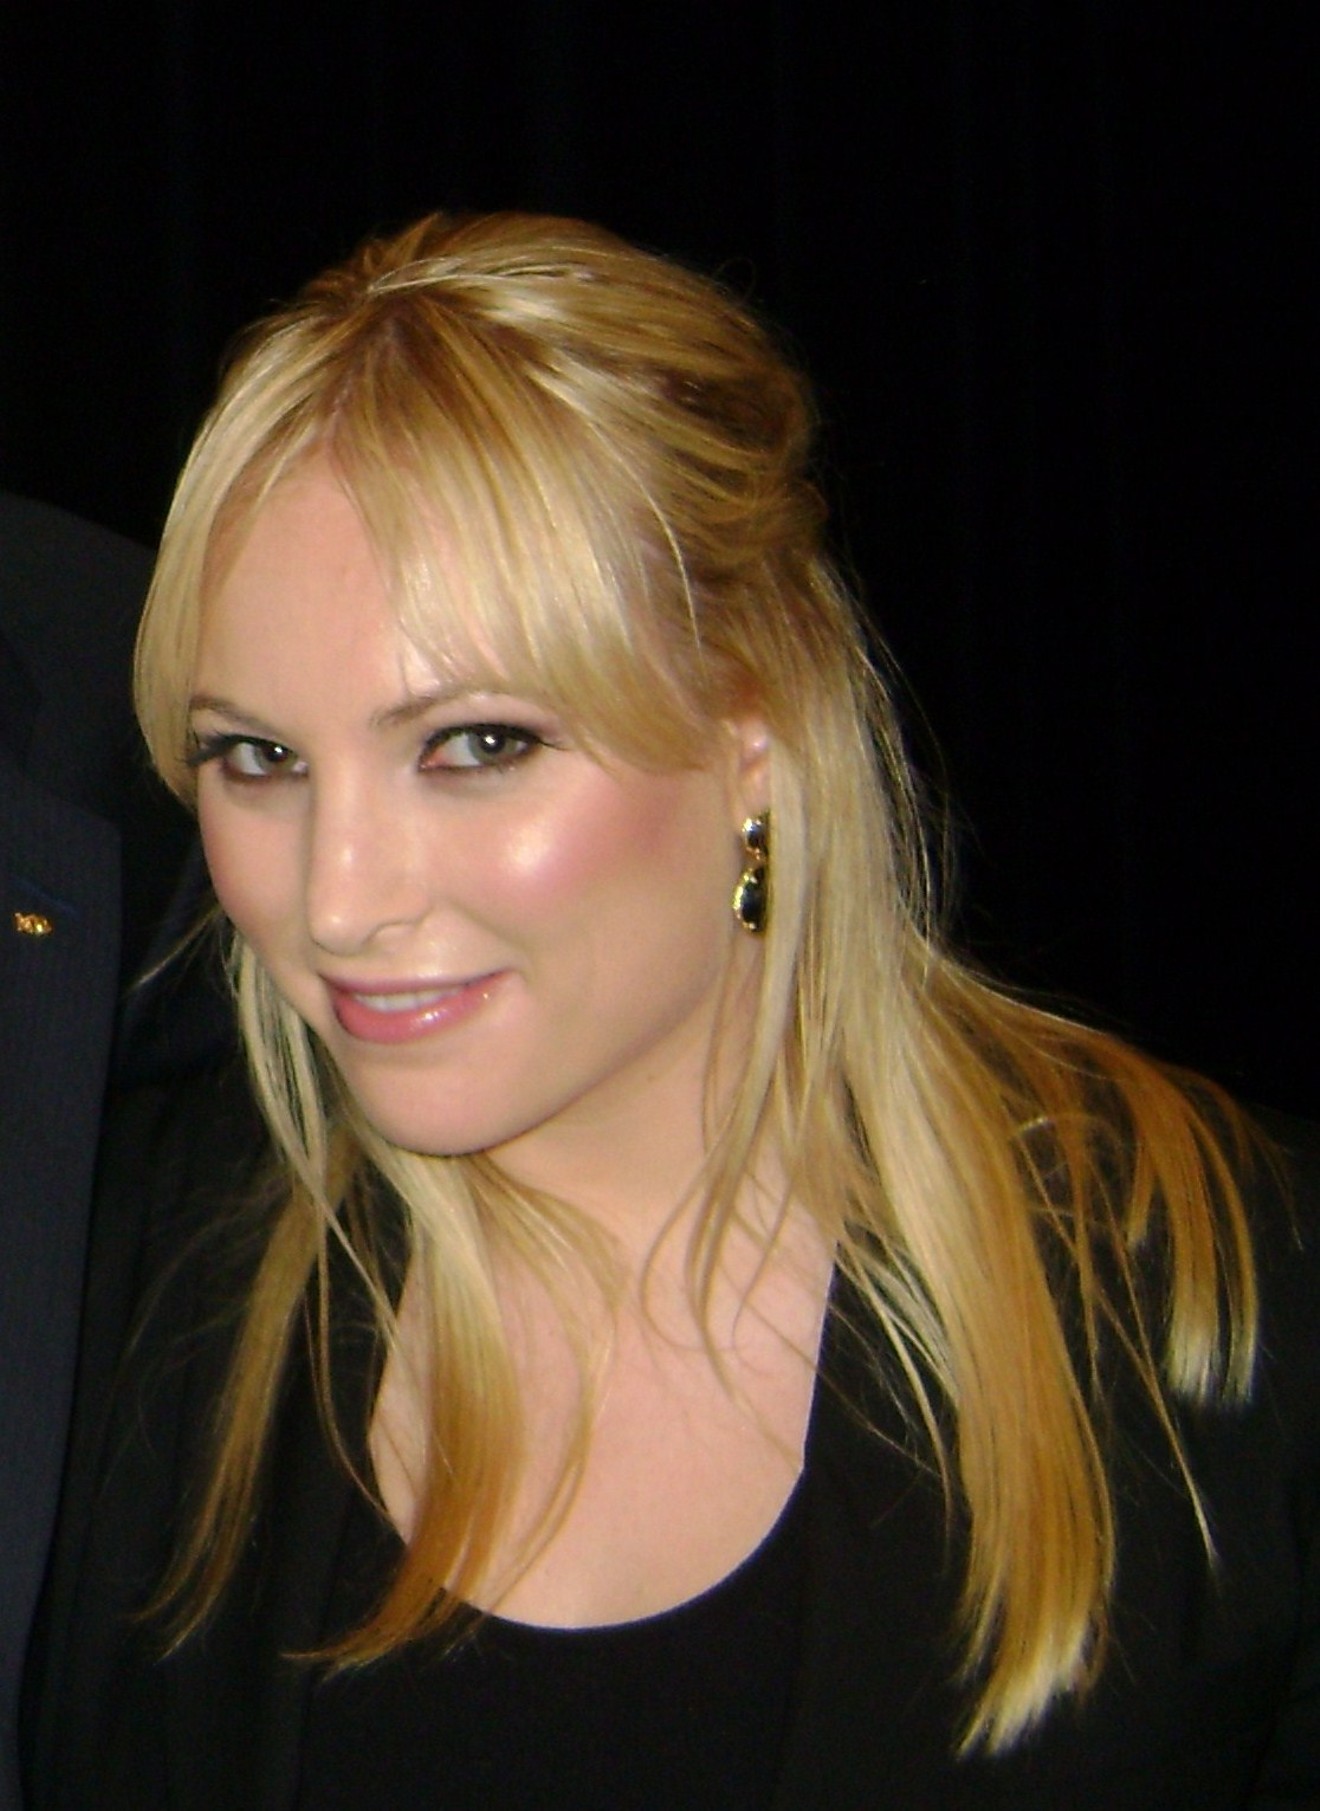 Meghan McCain got hitched this week to a conservative writer who has been previously accused of plagiarism.